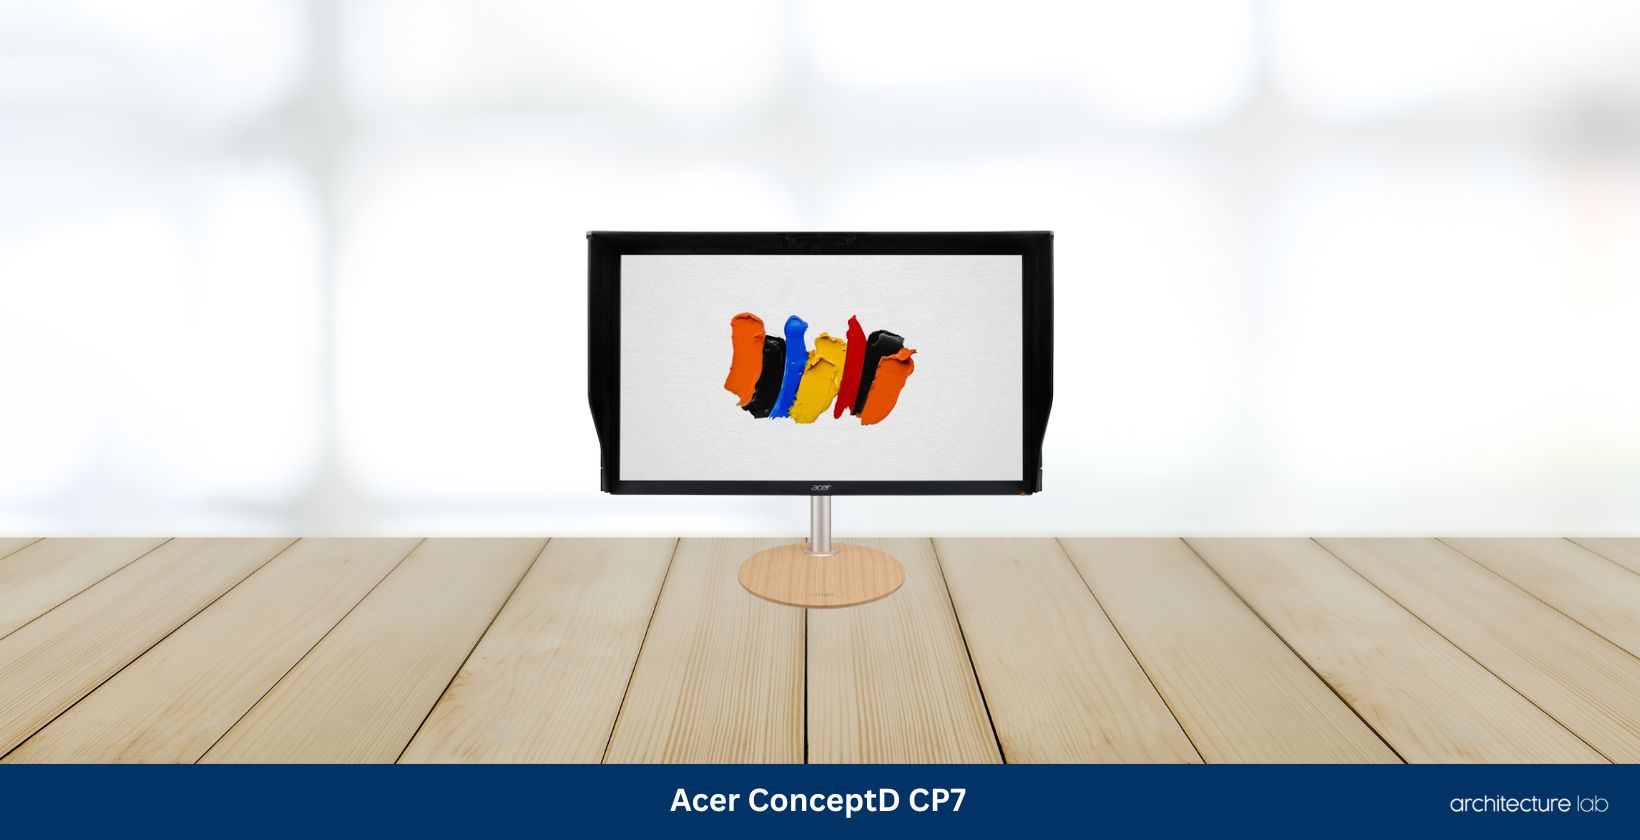 Acer conceptd cp7